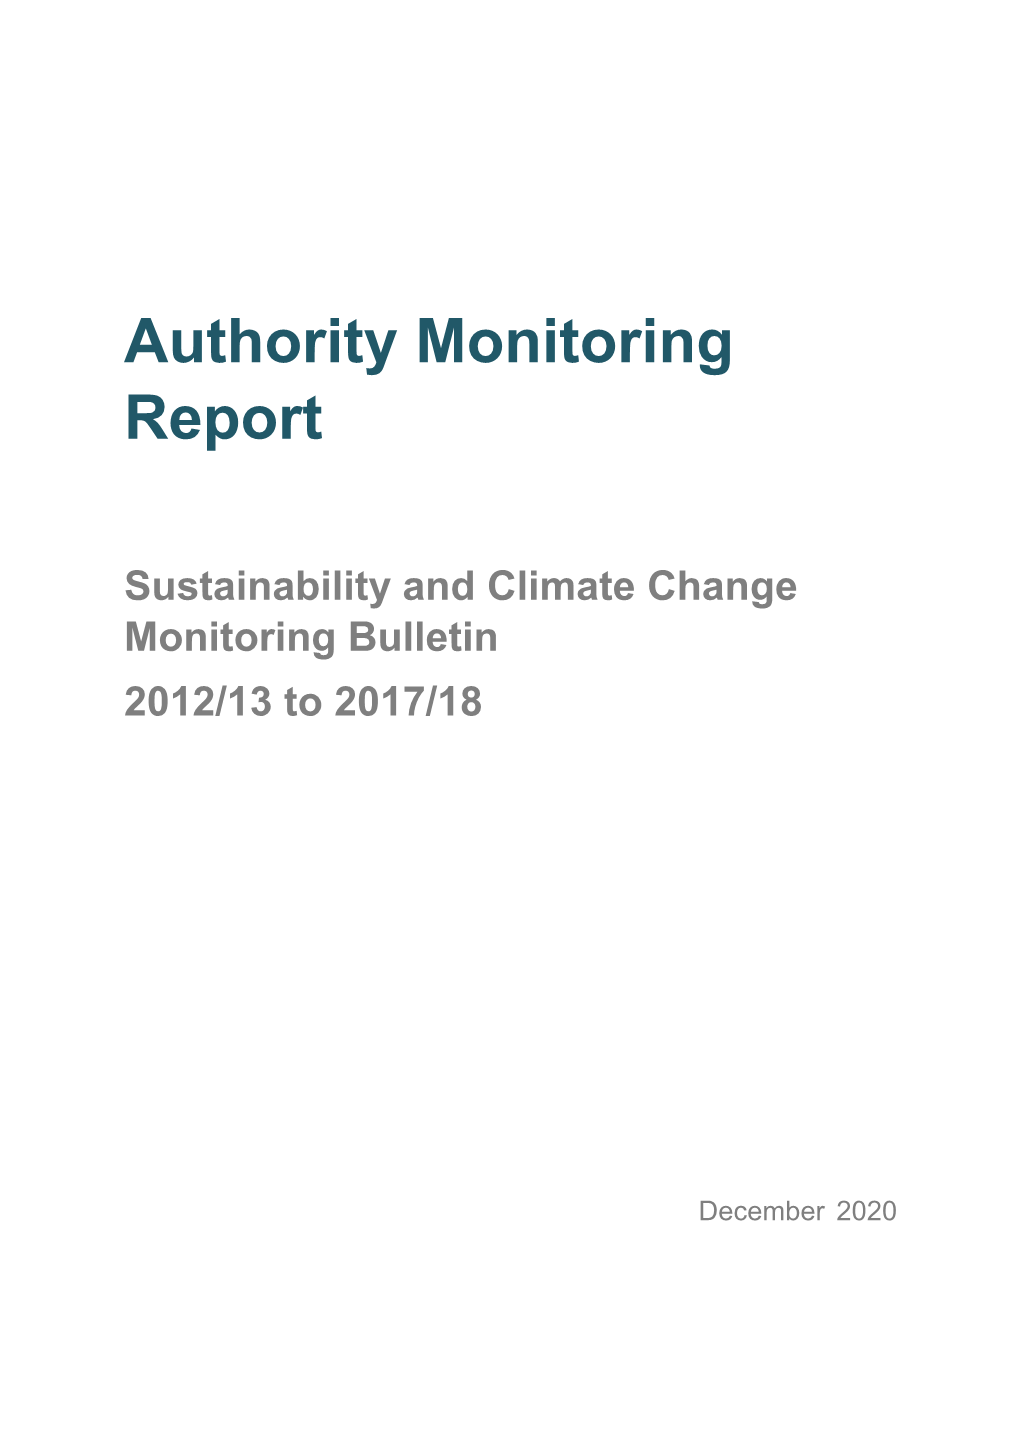 Sustainability and Climate Change Monitoring Bulletin 2012/13 to 2017/18